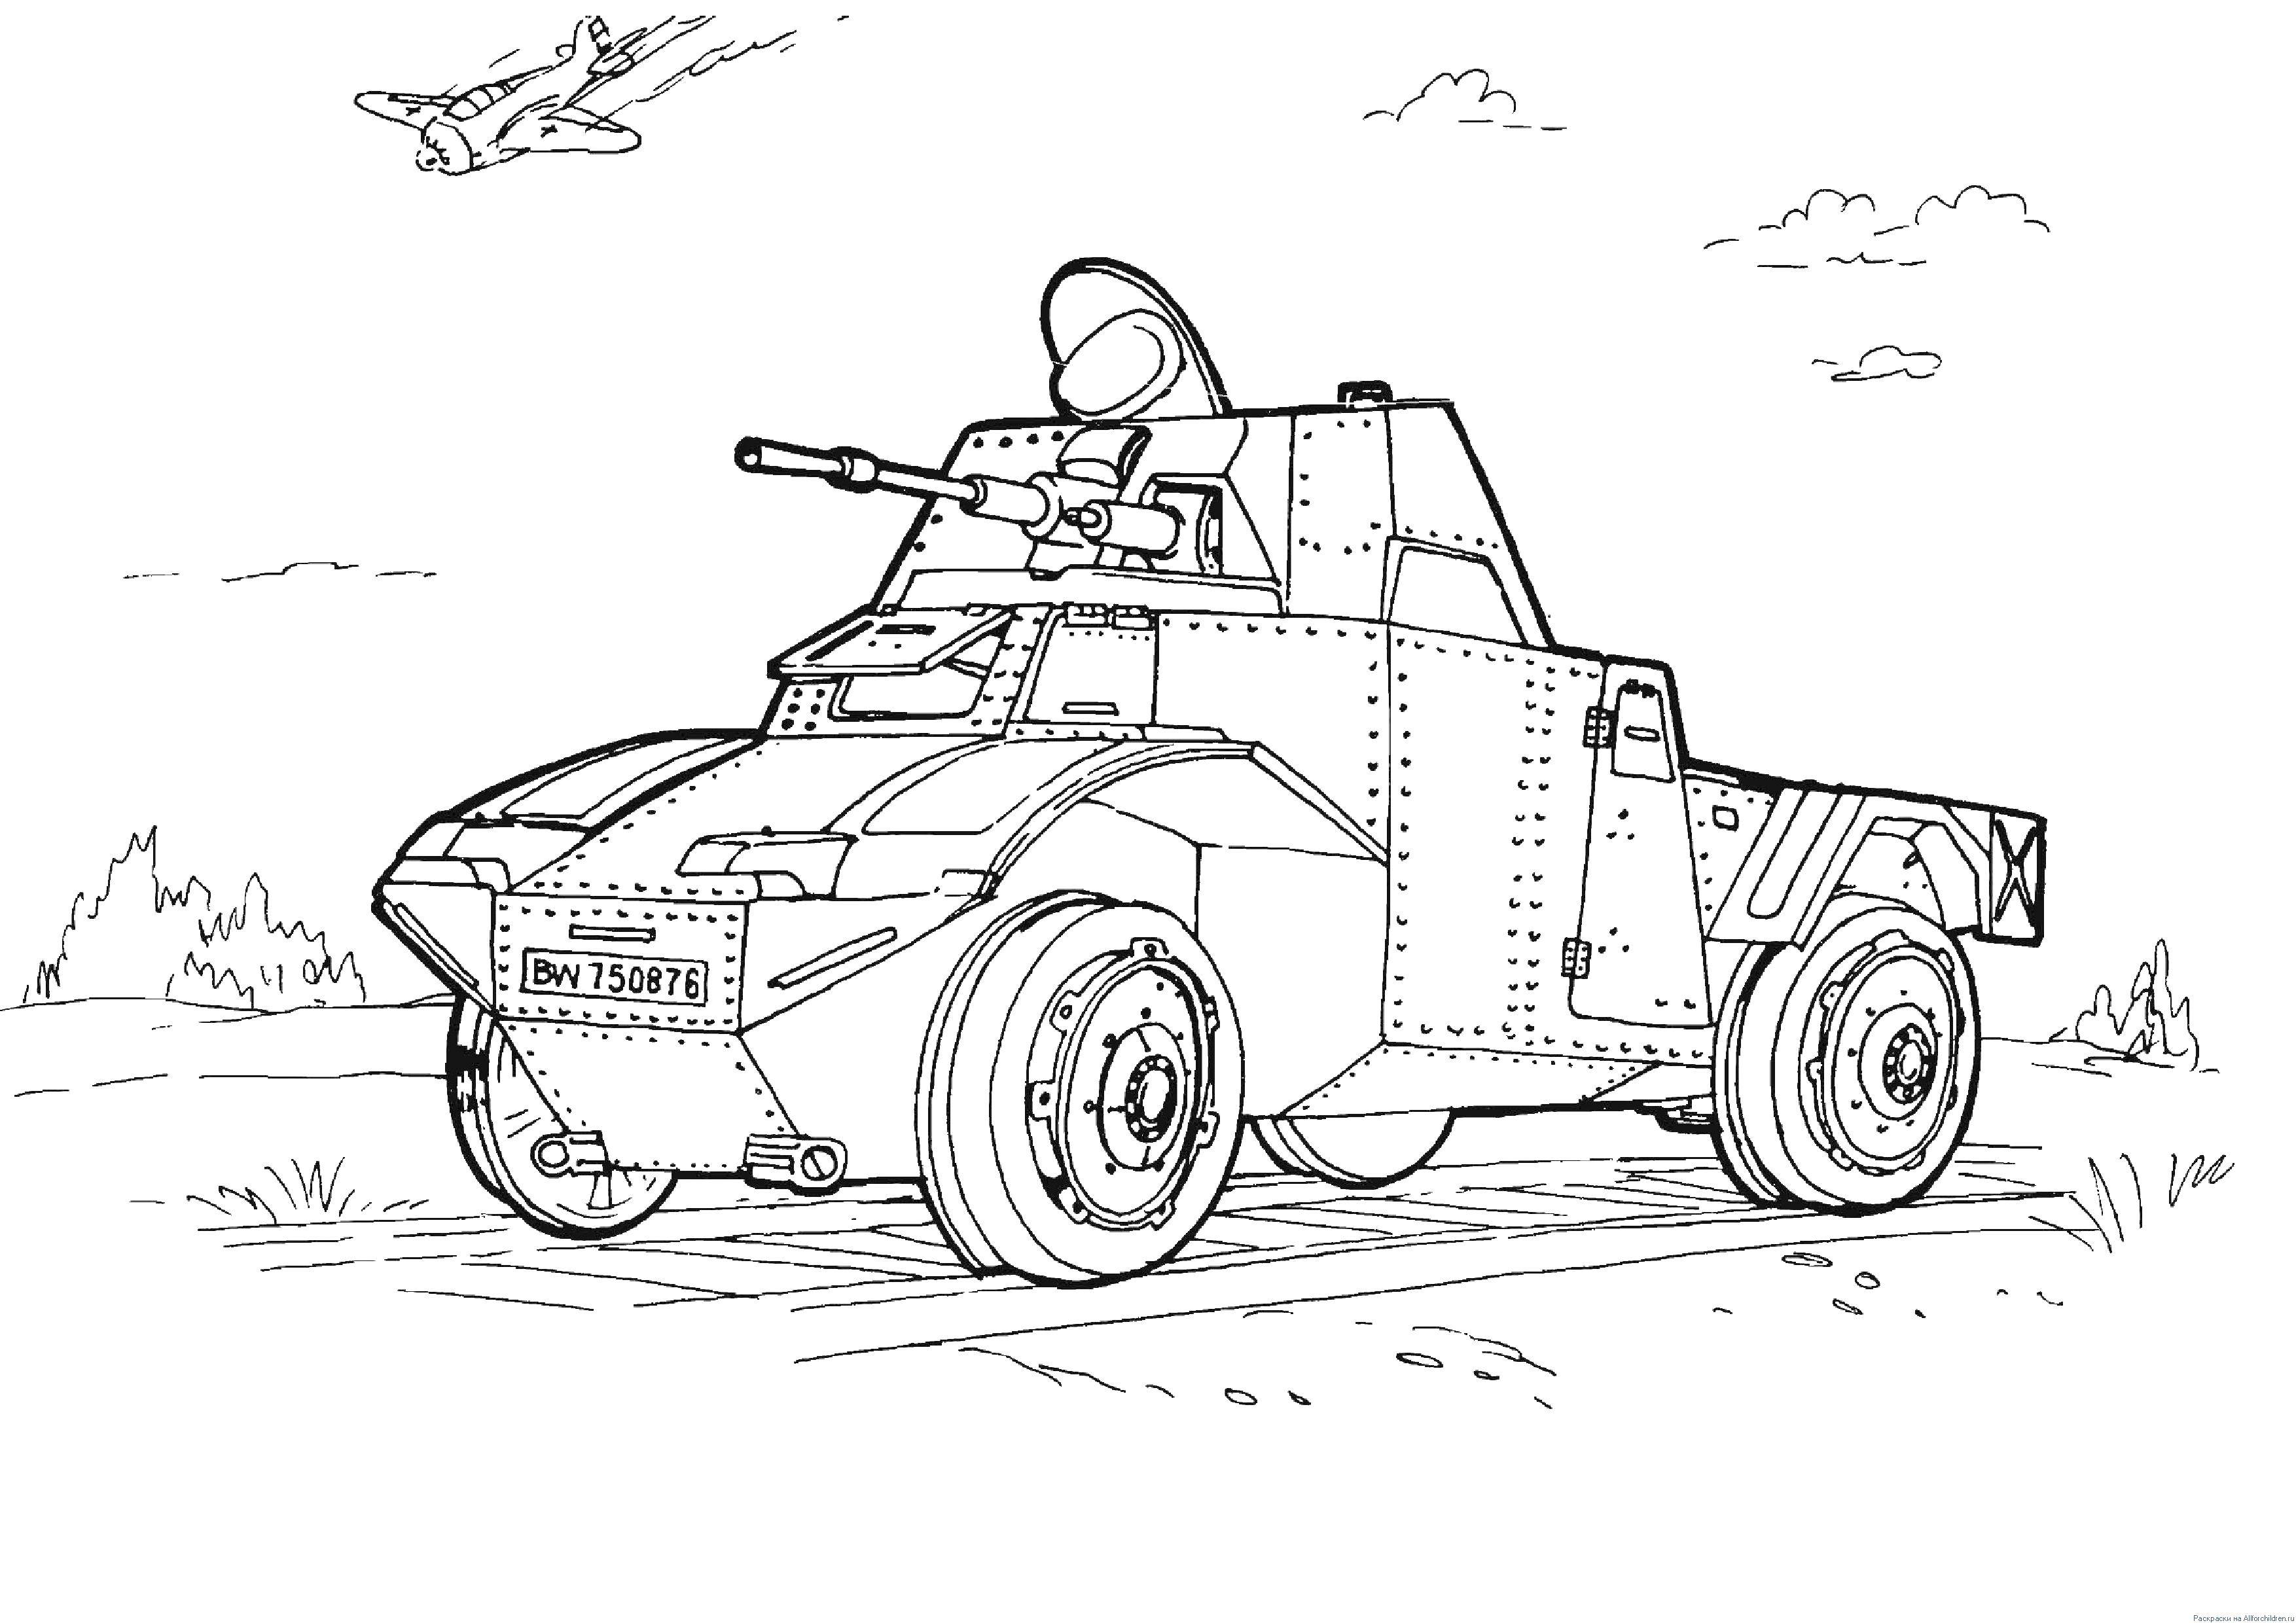 Coloring Military equipment. Category military coloring pages. Tags:  military equipment. war, machinery.